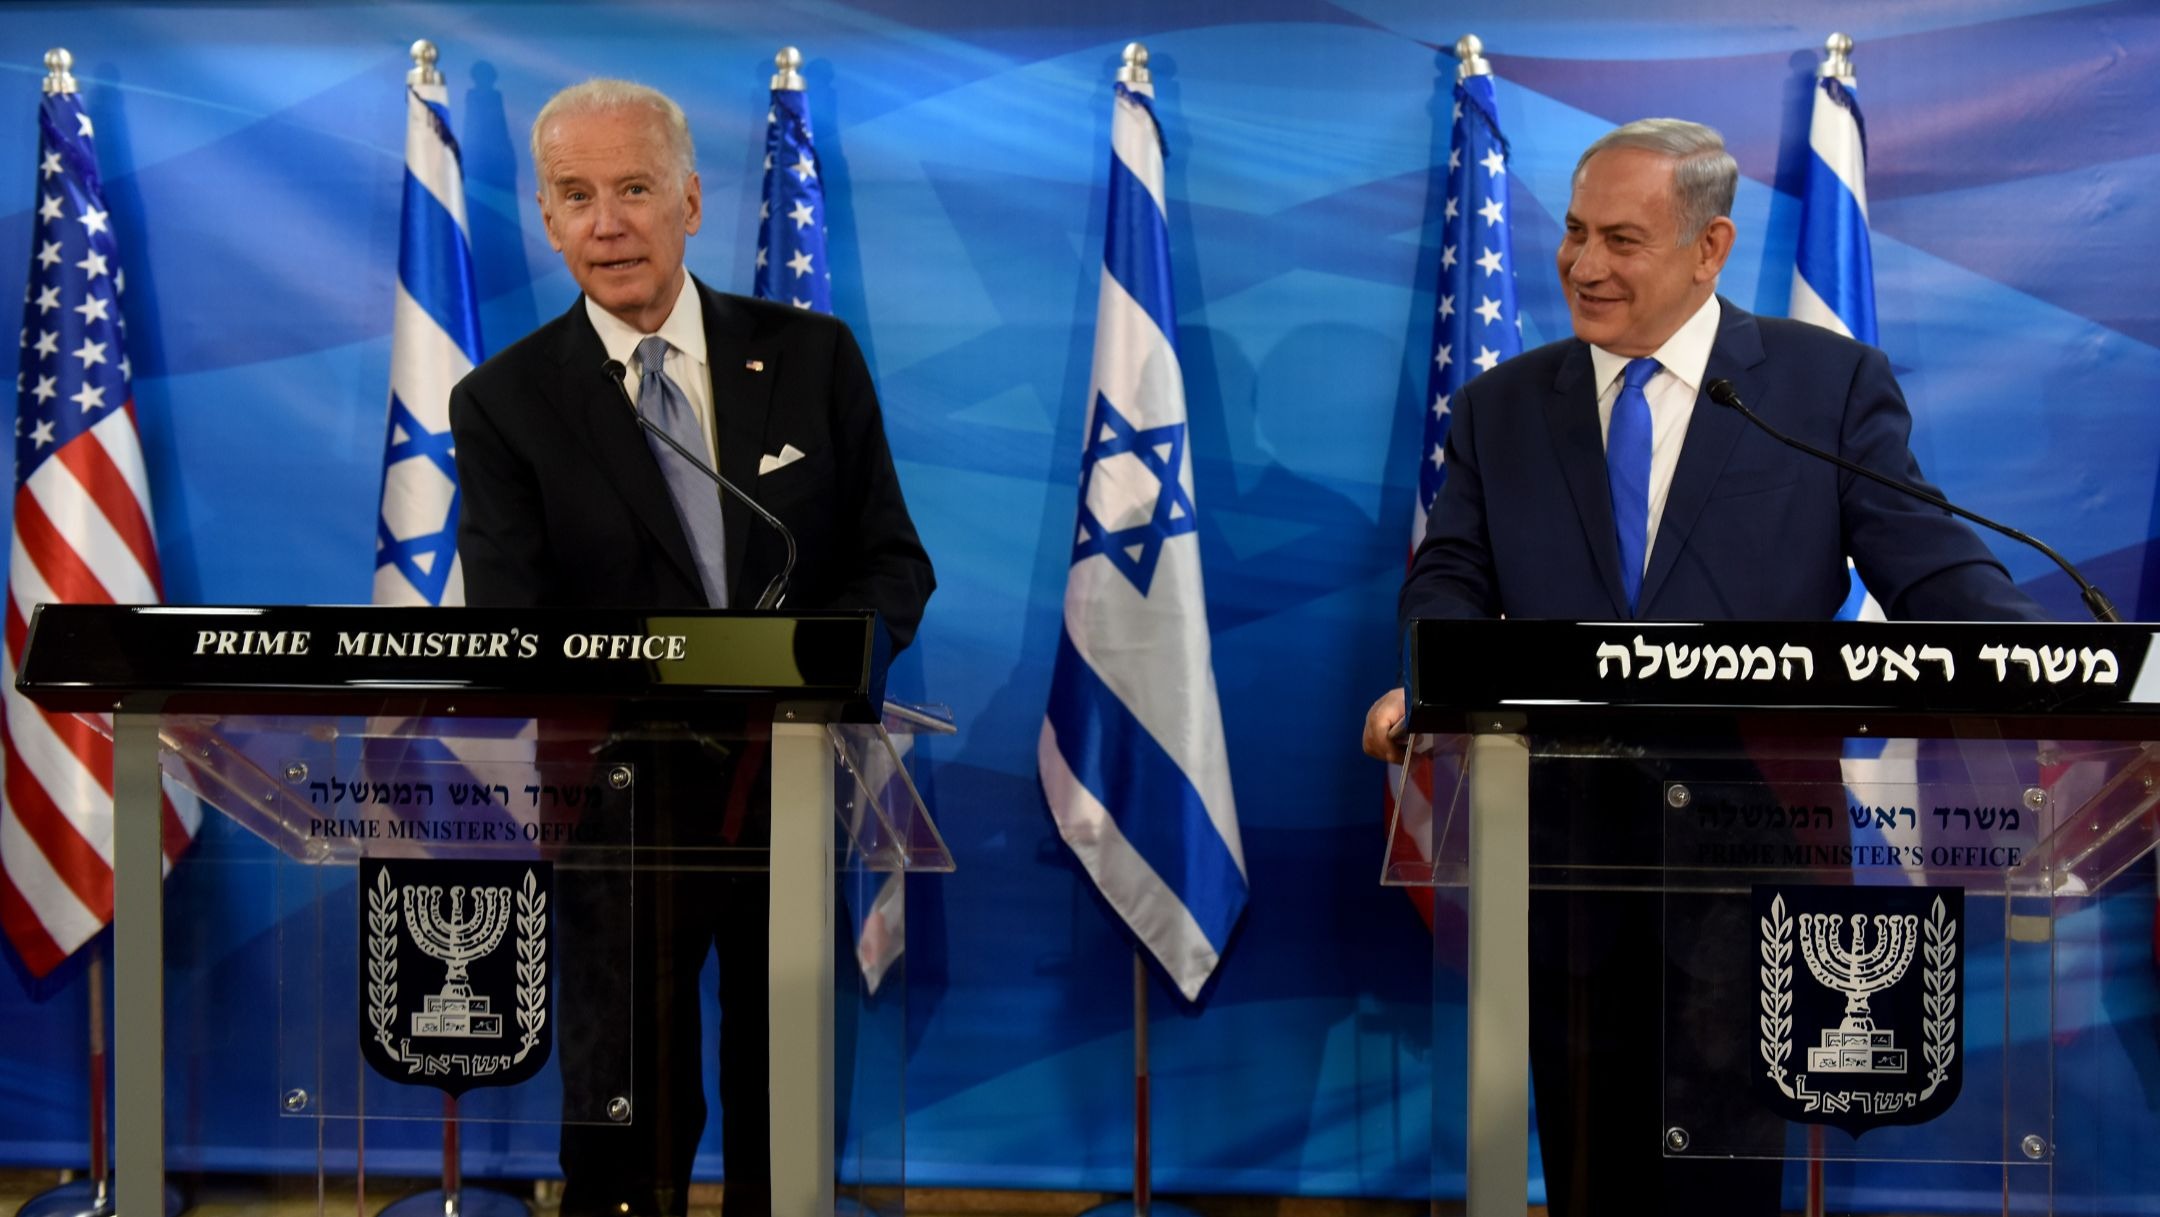 Then-Vice President Joe Biden, left, and Israeli Prime Minister Benjamin Netanyahu give joint statements to the press in the prime minister’s office in Jerusalem, March 9, 2016. (Debbie Hill/AFP via Getty Images)